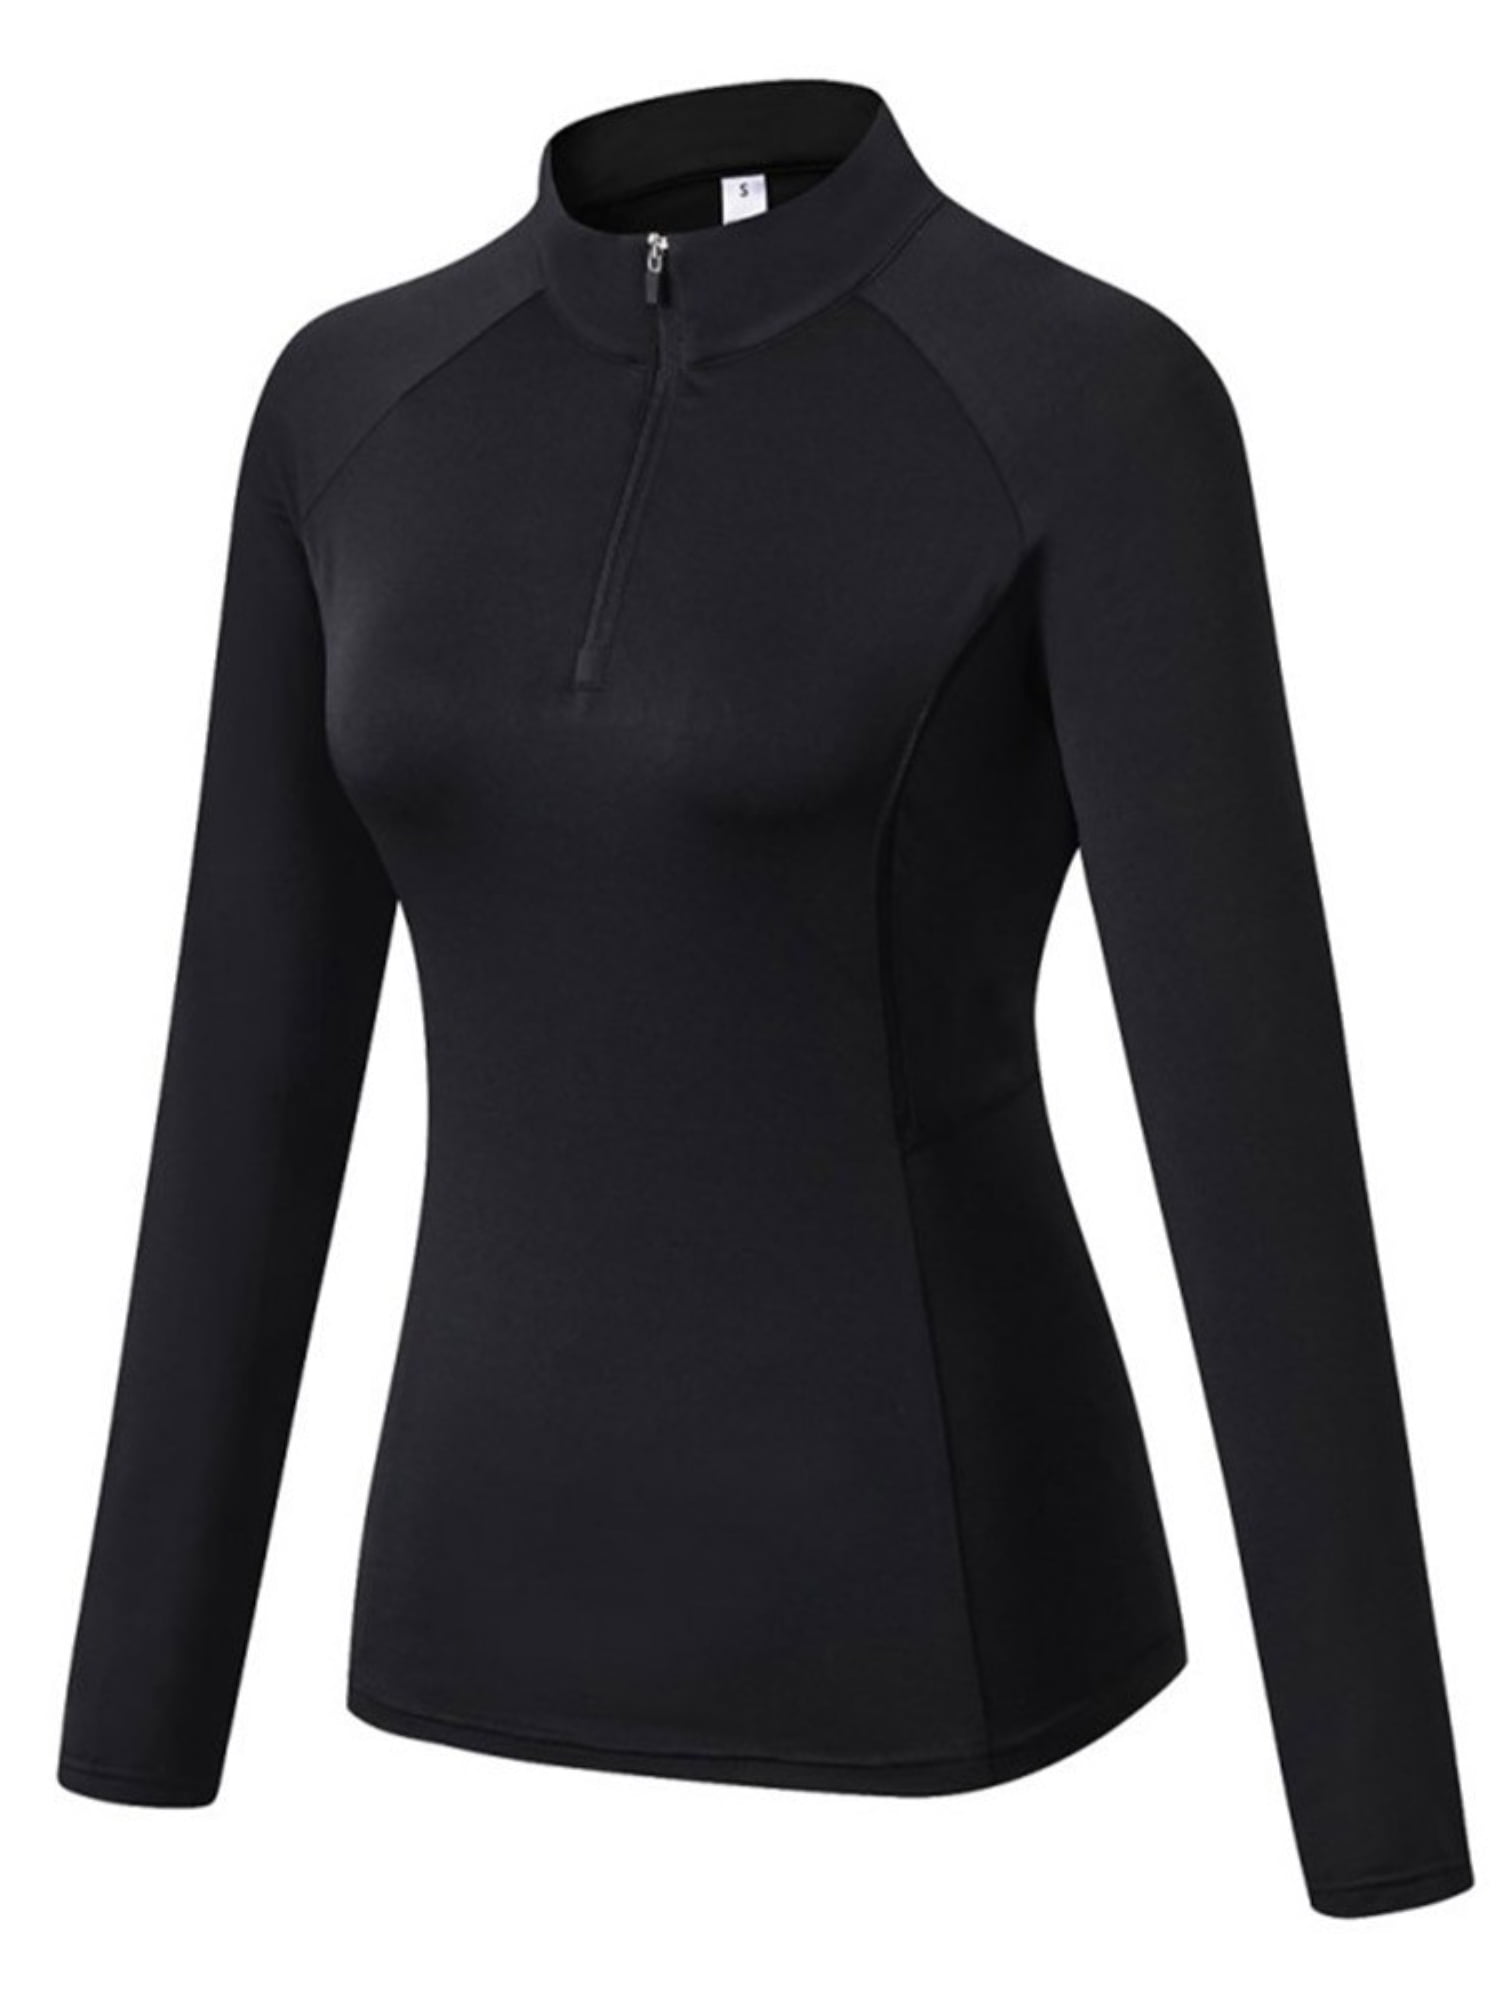 Women Petite's Zipper Long Sleeve Compression Shirts with  Thumbhole,Quick-Drying Yoga Athletic Running T Shirt Pullover for Hiking  Running Workout Tops,Soft Mock Neck Thermal Tops,XS-XL Black 